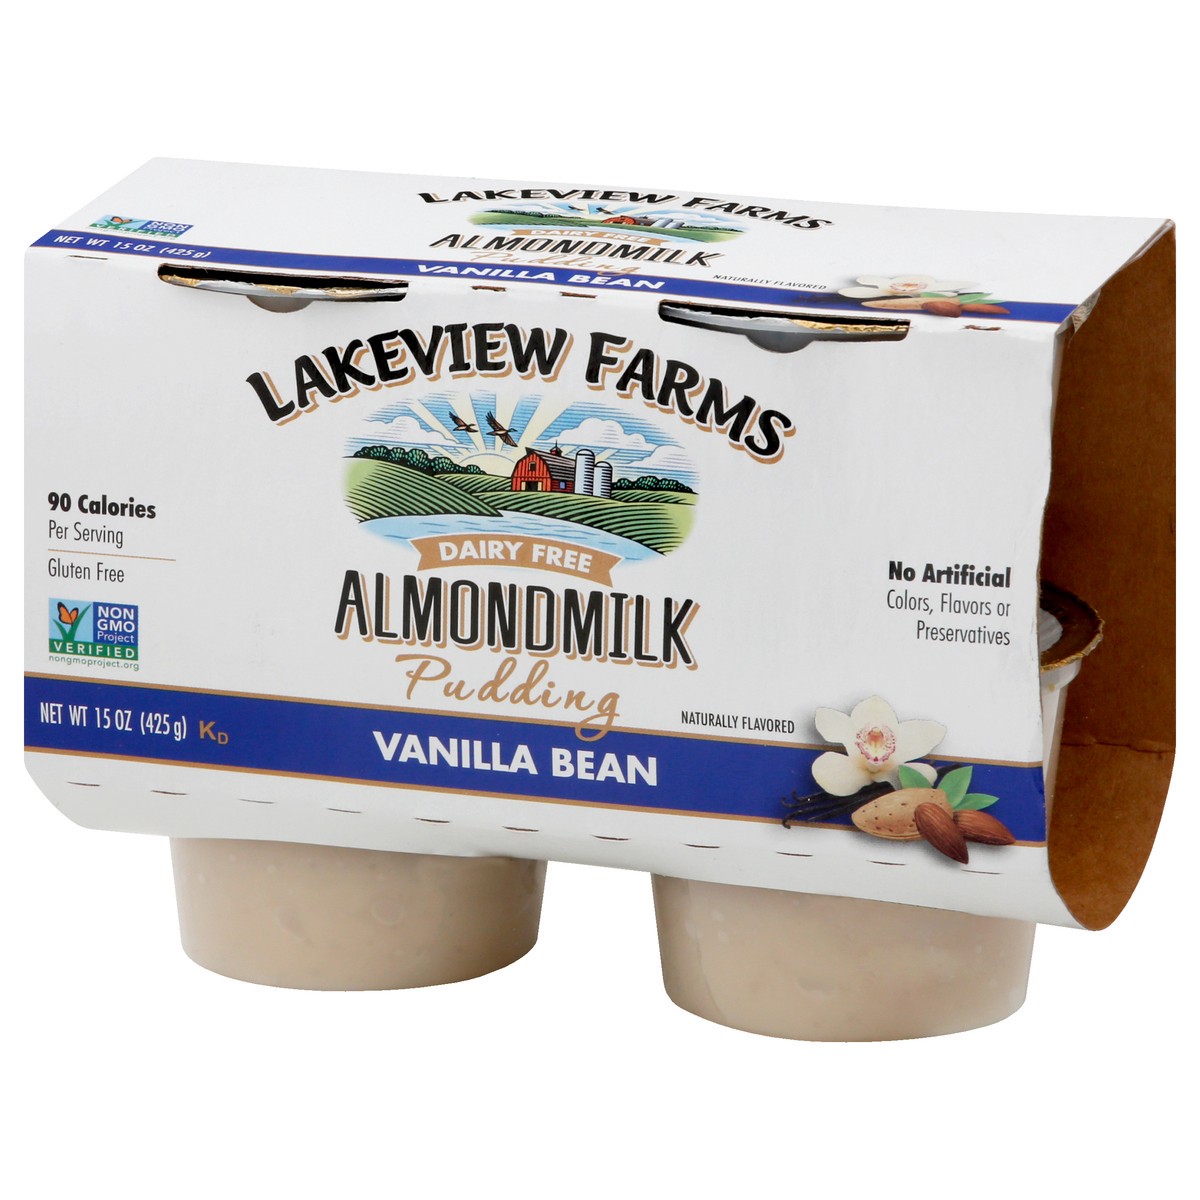 slide 3 of 9, Lakeview Farms Almond Milk Dairy Free Vanilla Bean Pudding 4 ea, 4 ct